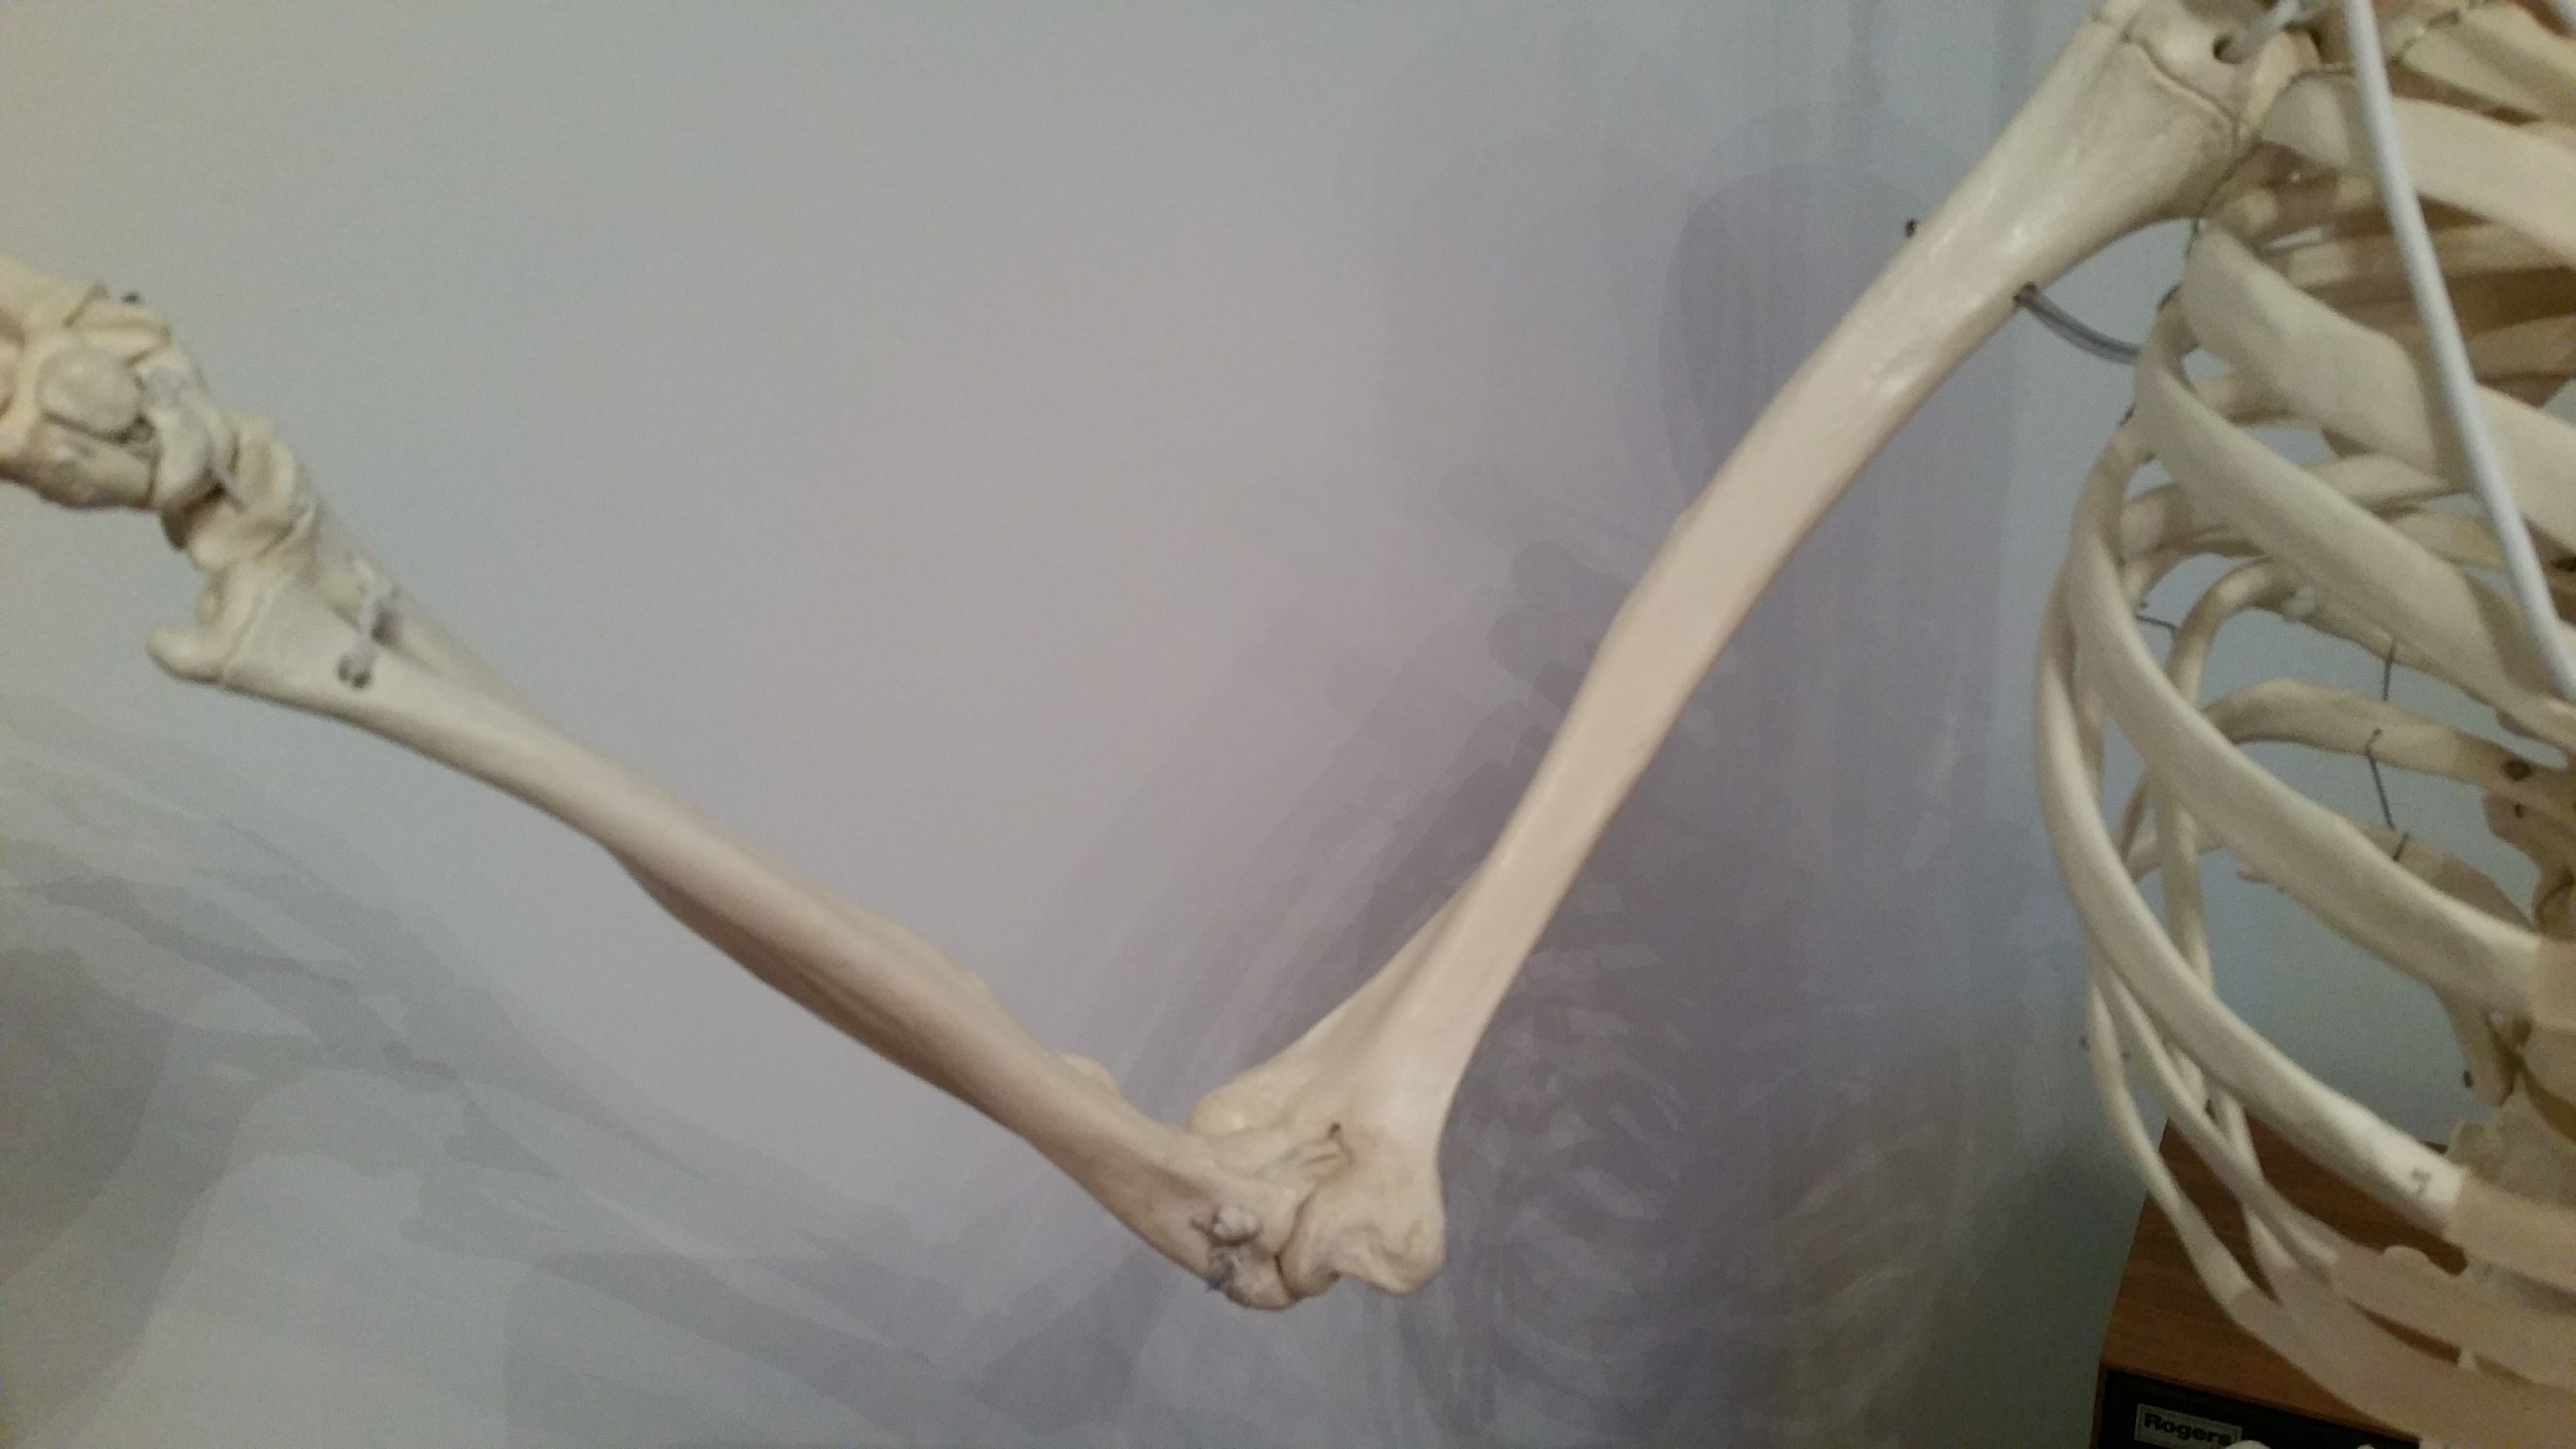 Boris Bone's Blog - Up to your elbows in anatomy revision?